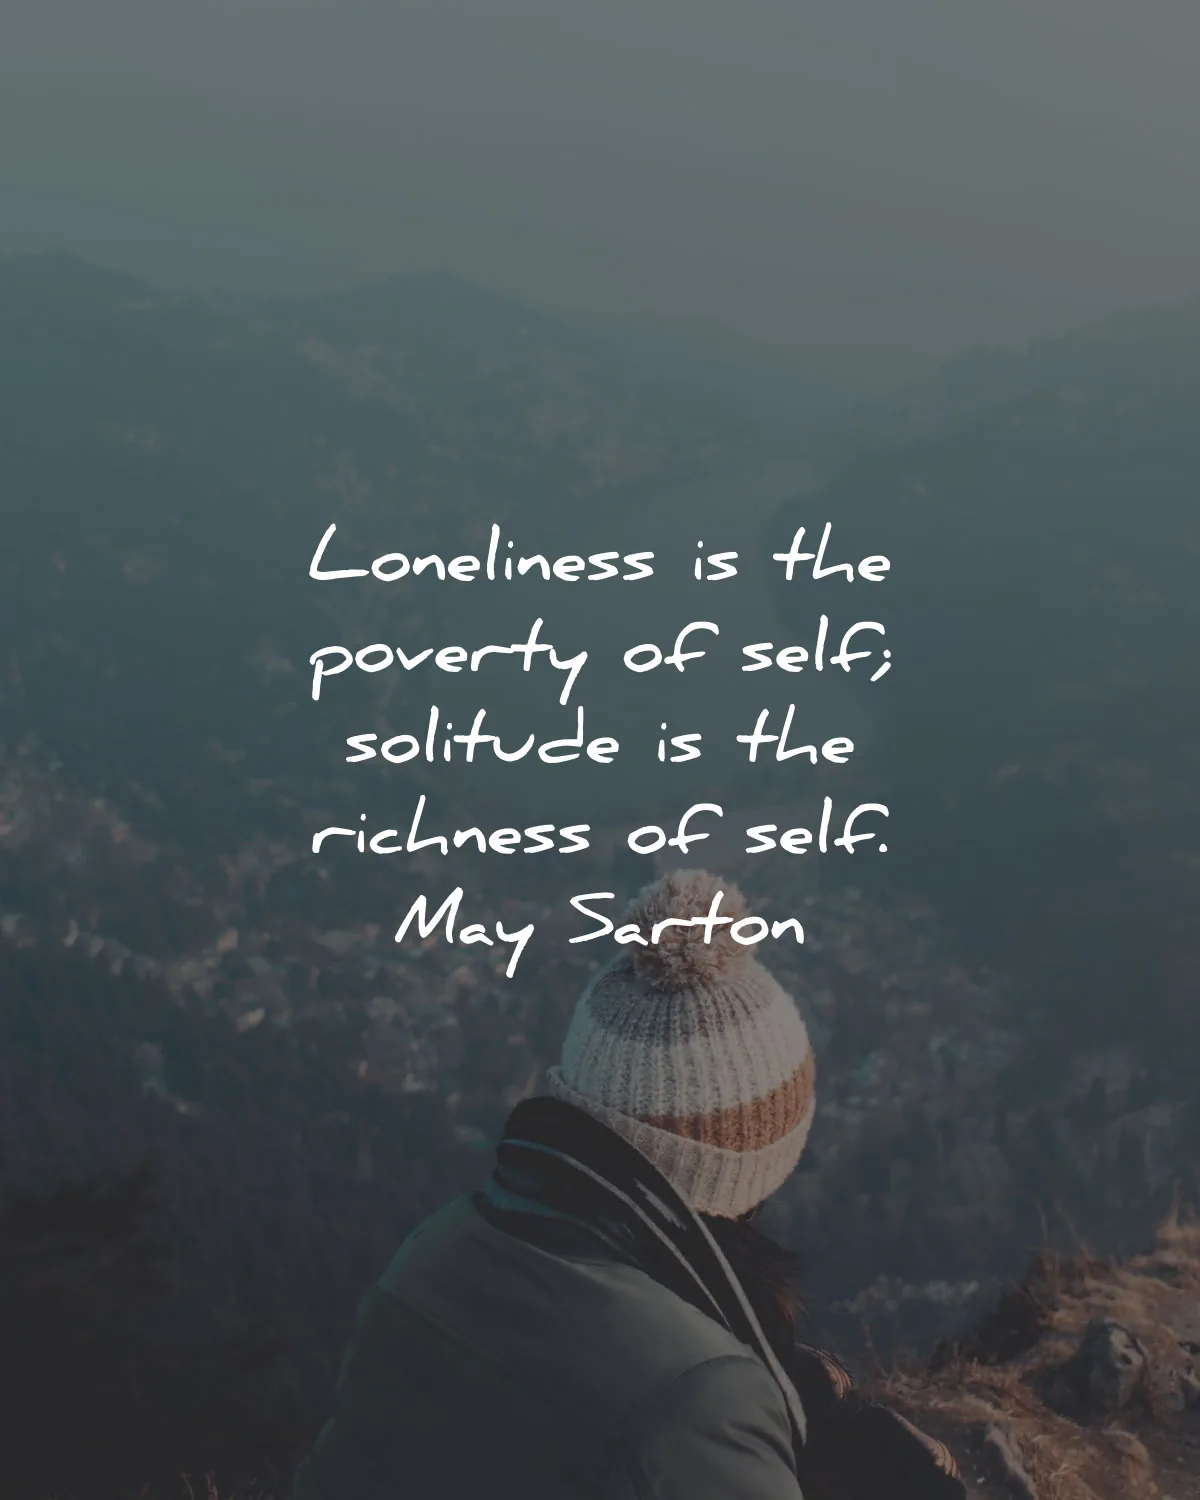 solitude quotes loneliness poverty self richness may sarton wisdom